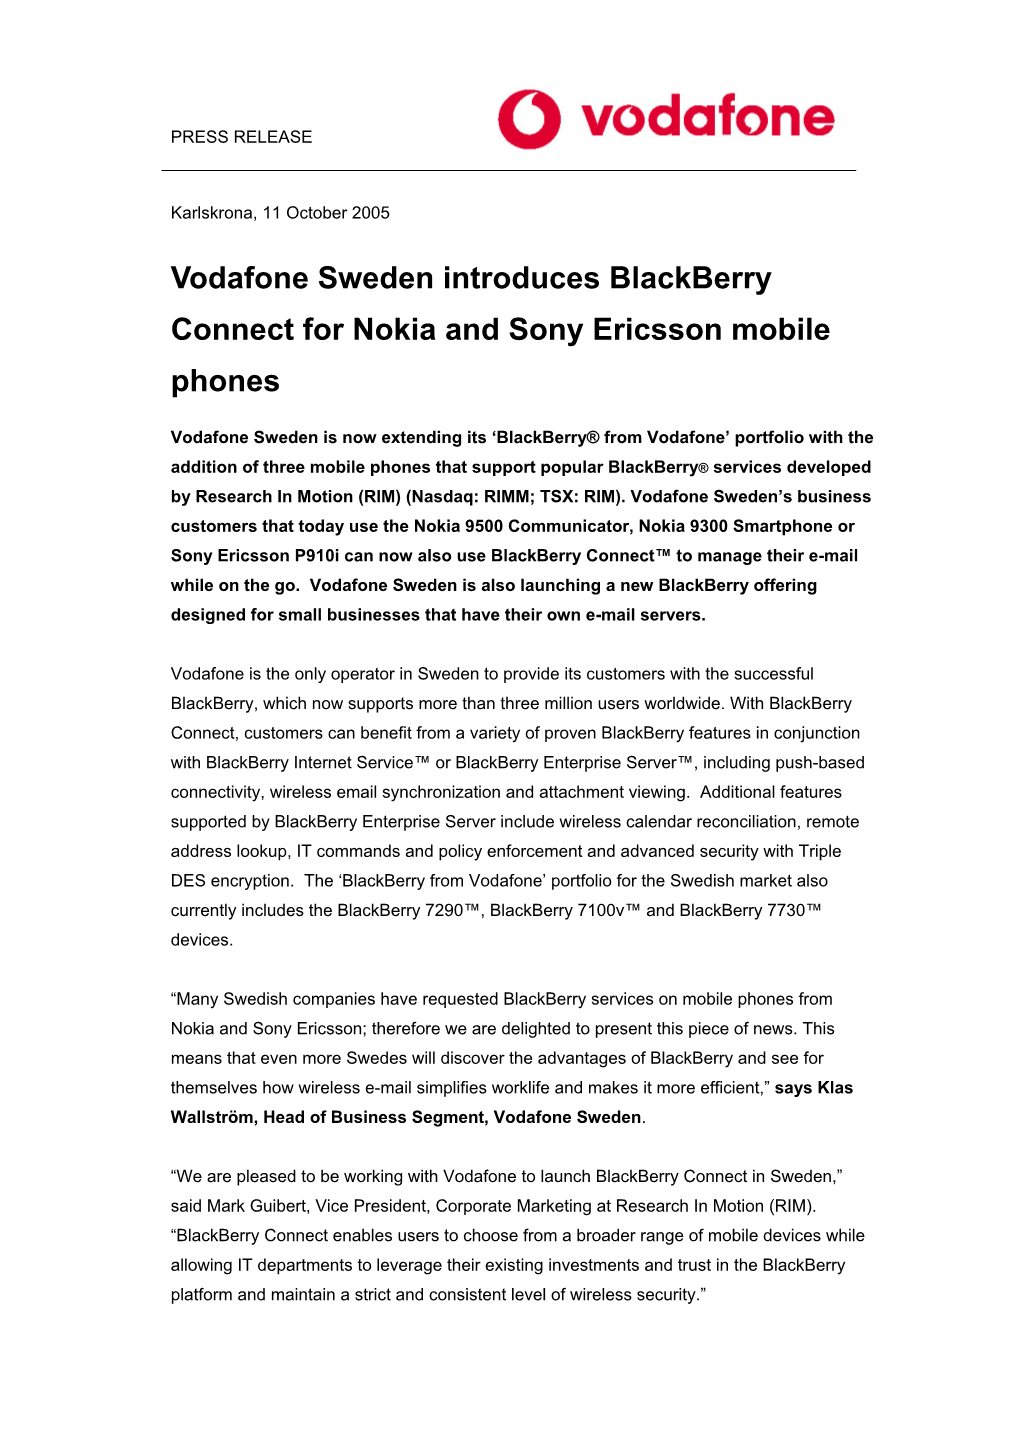 Vodafone Sweden Introduces Blackberry Connect for Nokia and Sony Ericsson Mobile Phones